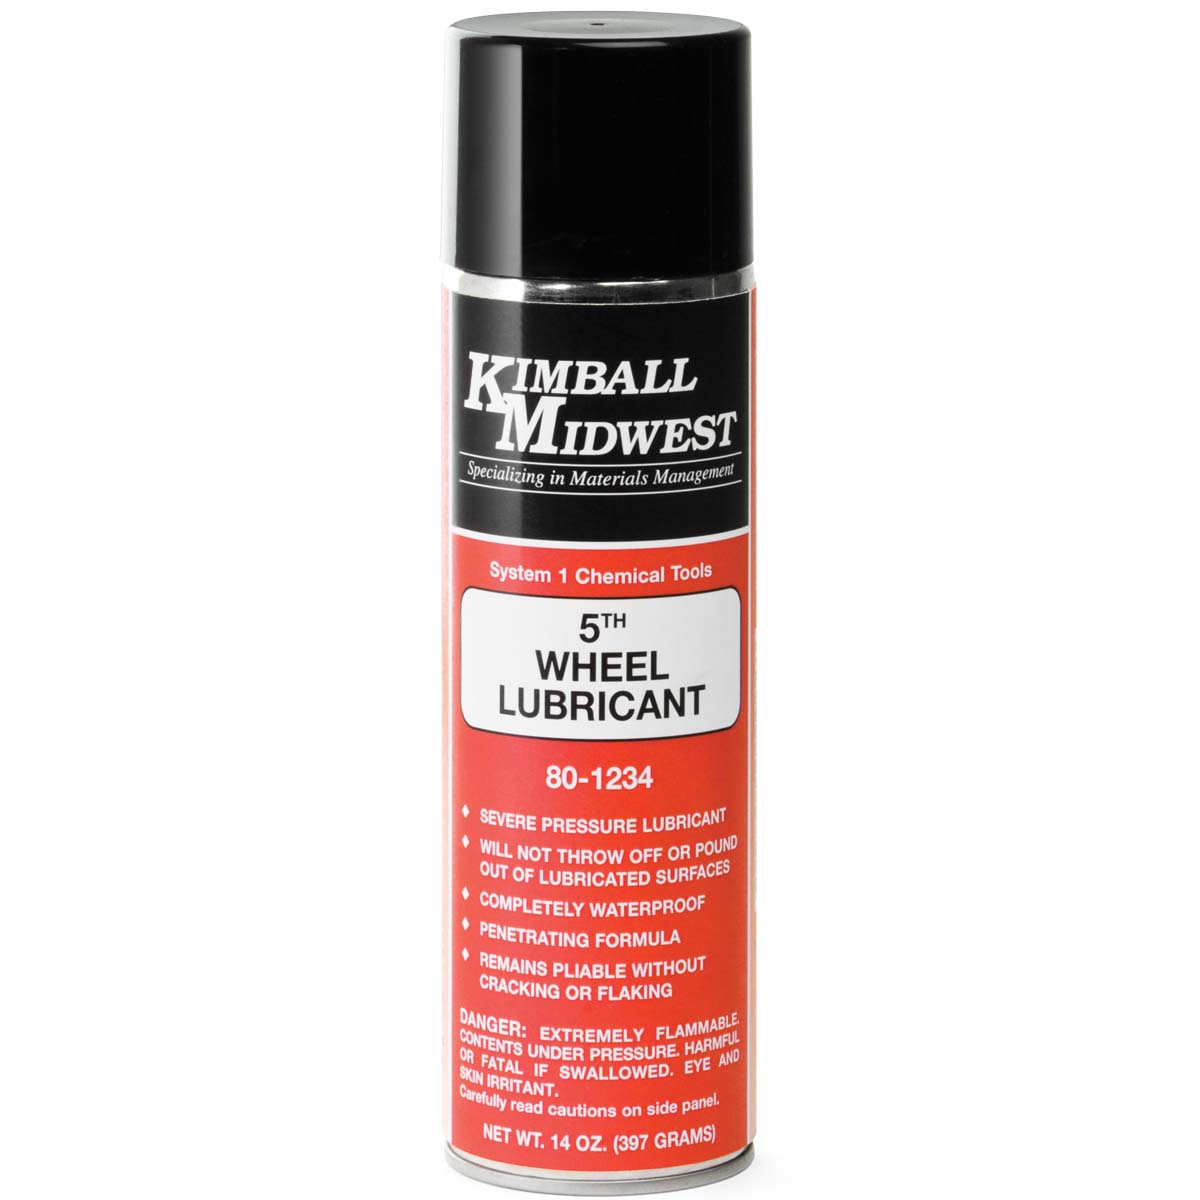 https://www.kimballmidwest.com/globalassets/products/large/80-1234.jpg